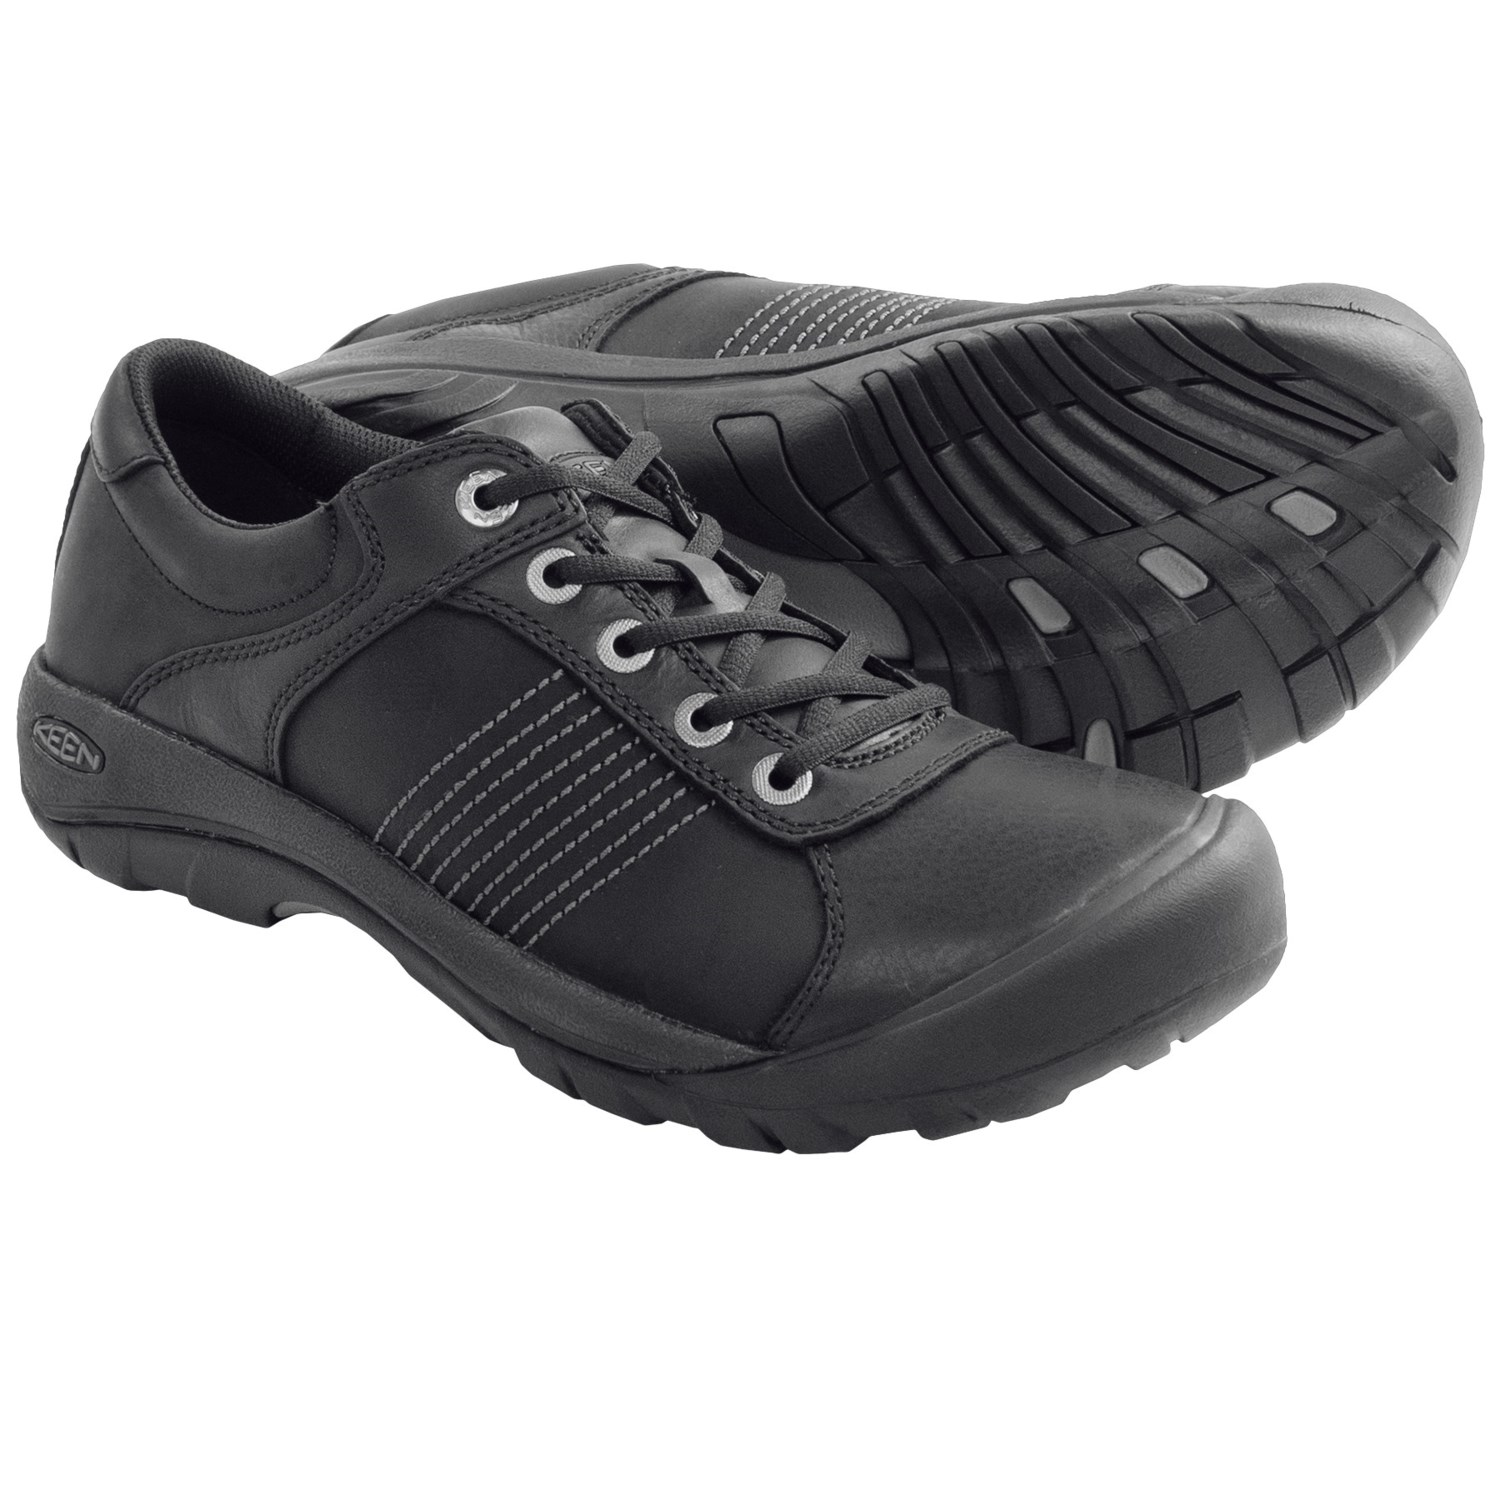 Keen Finlay Shoes (For Men) - Save 24%